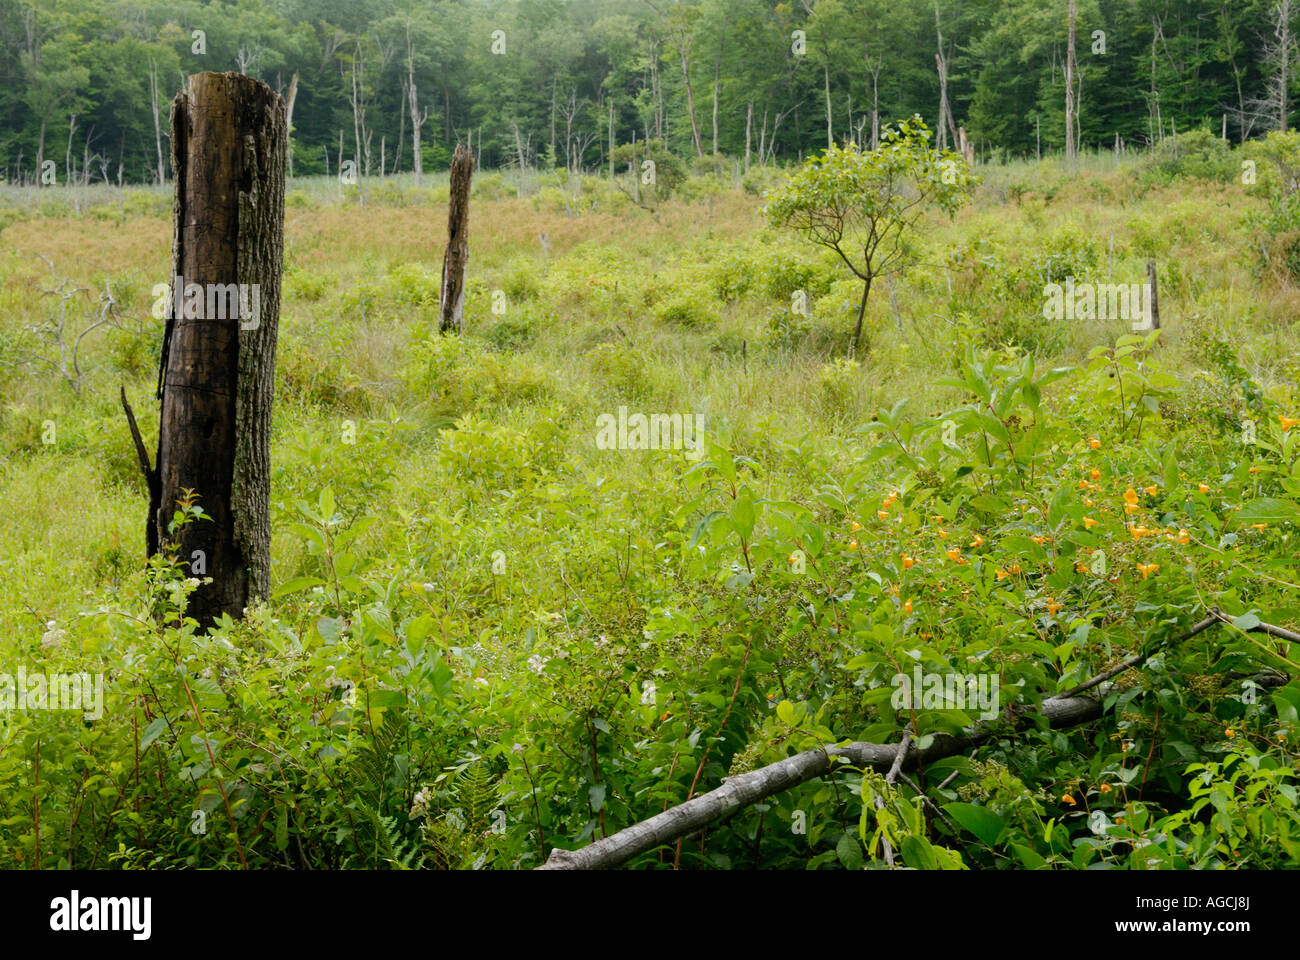 Secondary ecological succession in a former beaver pond area Stock Photo